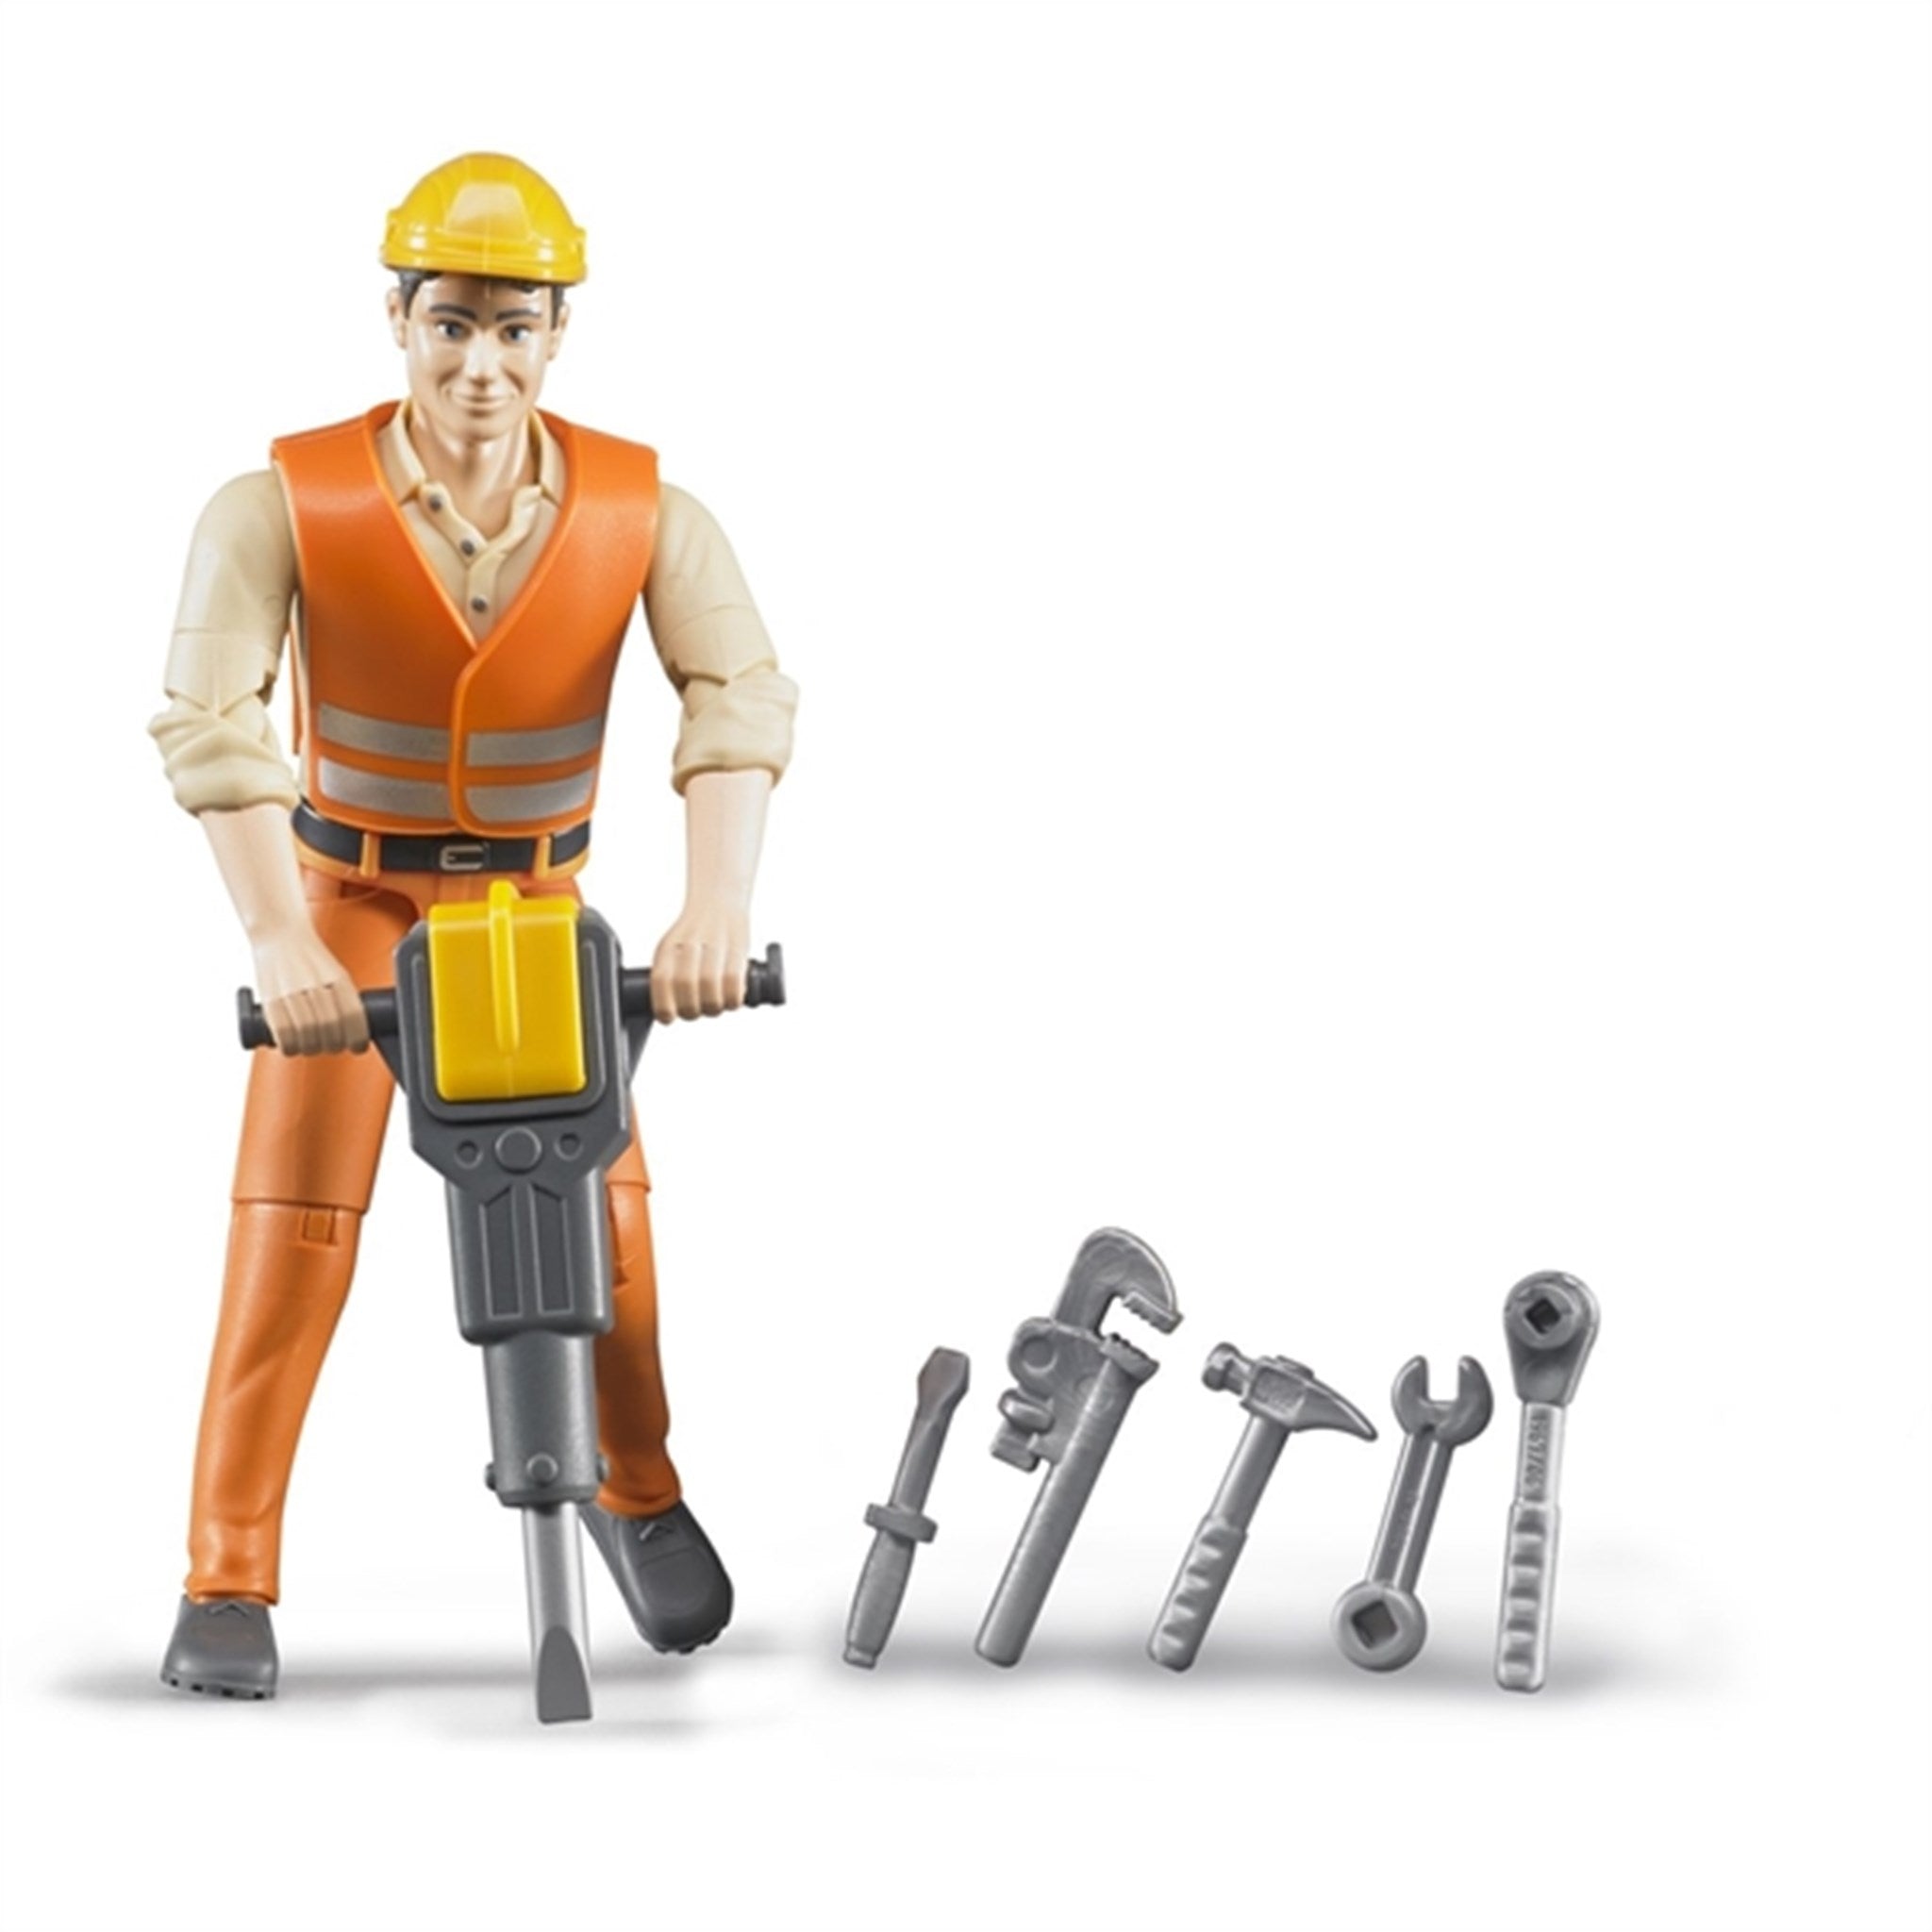 Bruder Bworld Construction Worker with Accessories